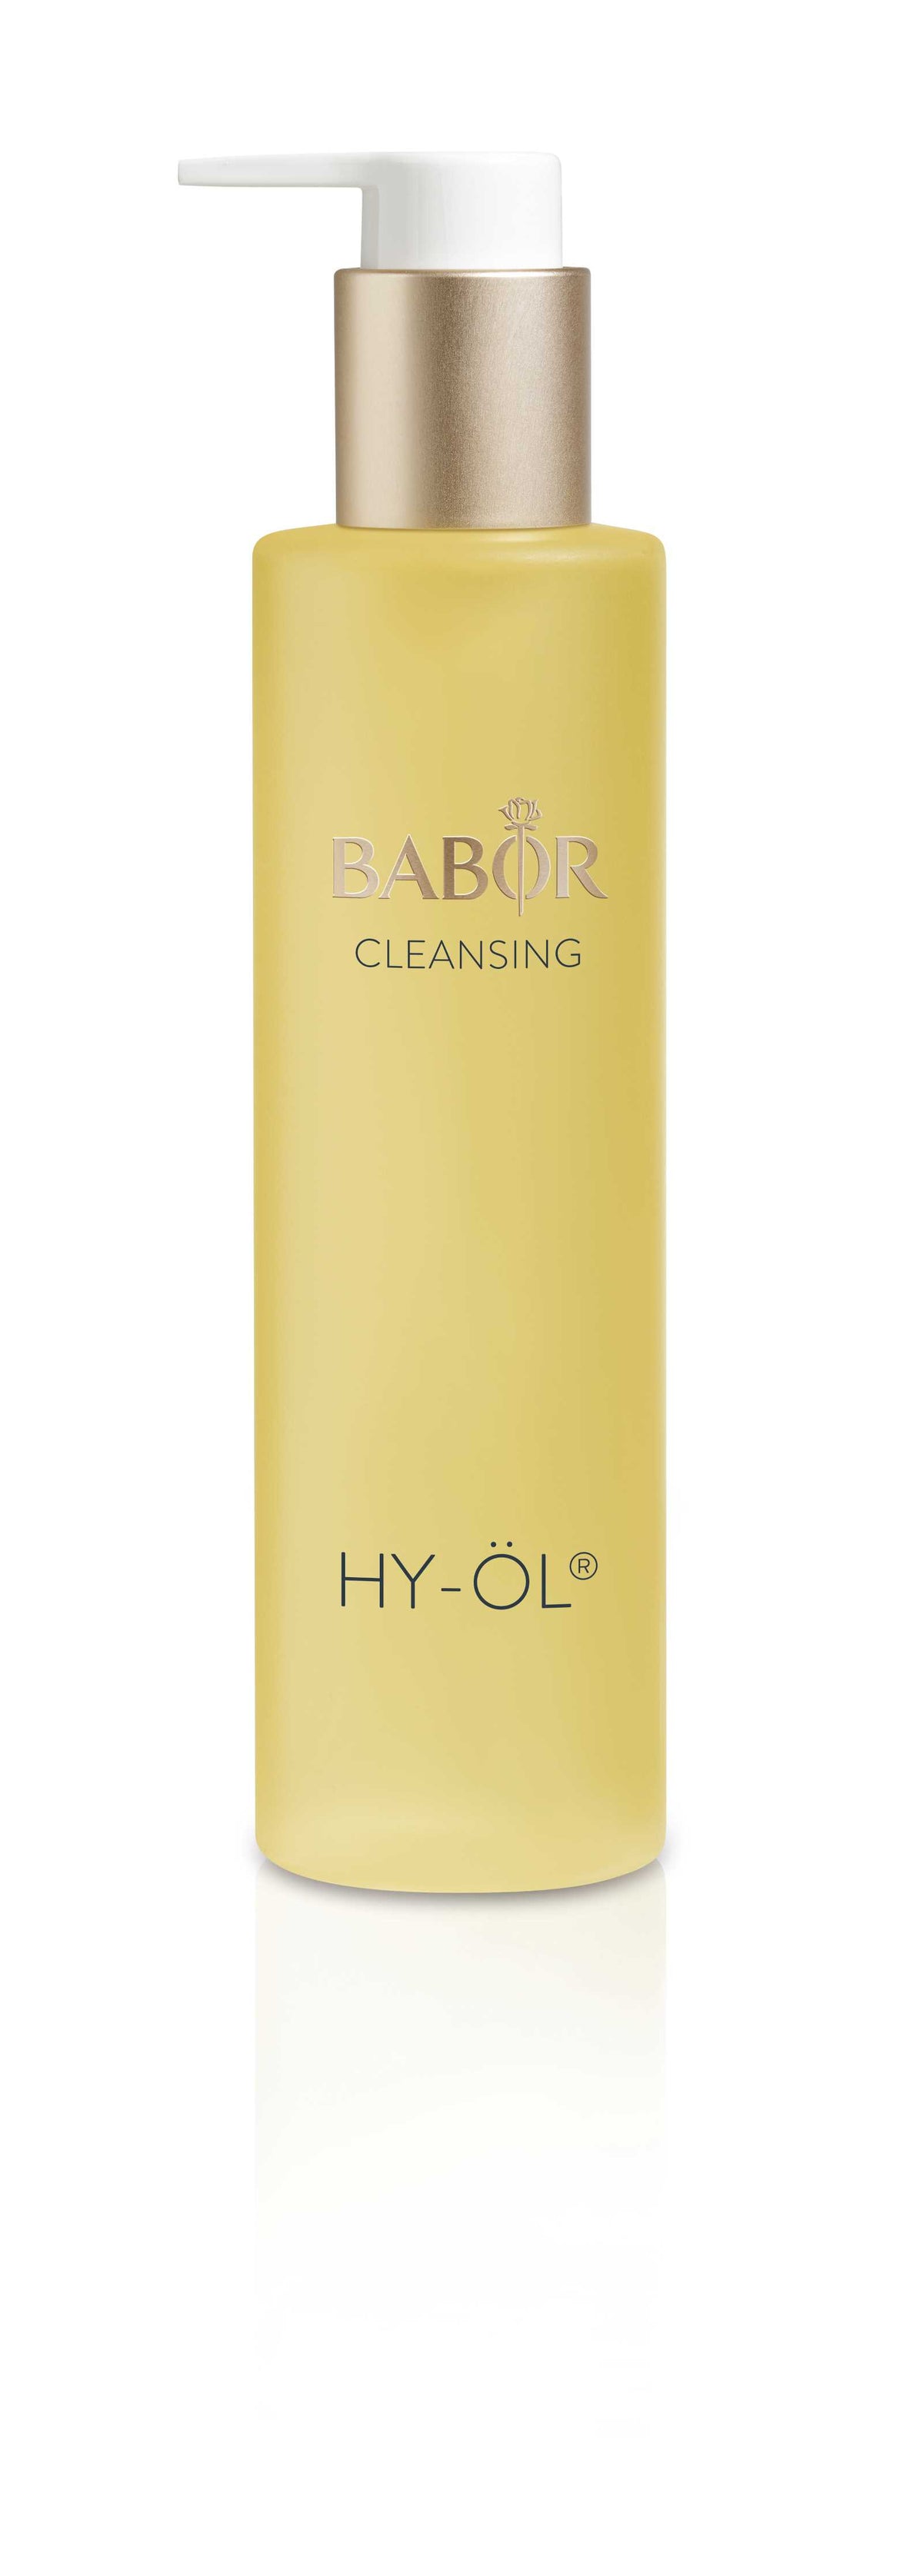 HY-ÖL® is part of a unique 2-step deep action cleanser that combines the natural cleansing powers of water and oil to remove water and oil soluble products thoroughly yet gently. . Made from pure natural plant oils and Quillaja Extract to intensify the cleansing action without causing tightness. HY-ÖL® is the 1st step of the bi-phase cleansing system (2nd step Phytoactive Hydro Base sold separately).